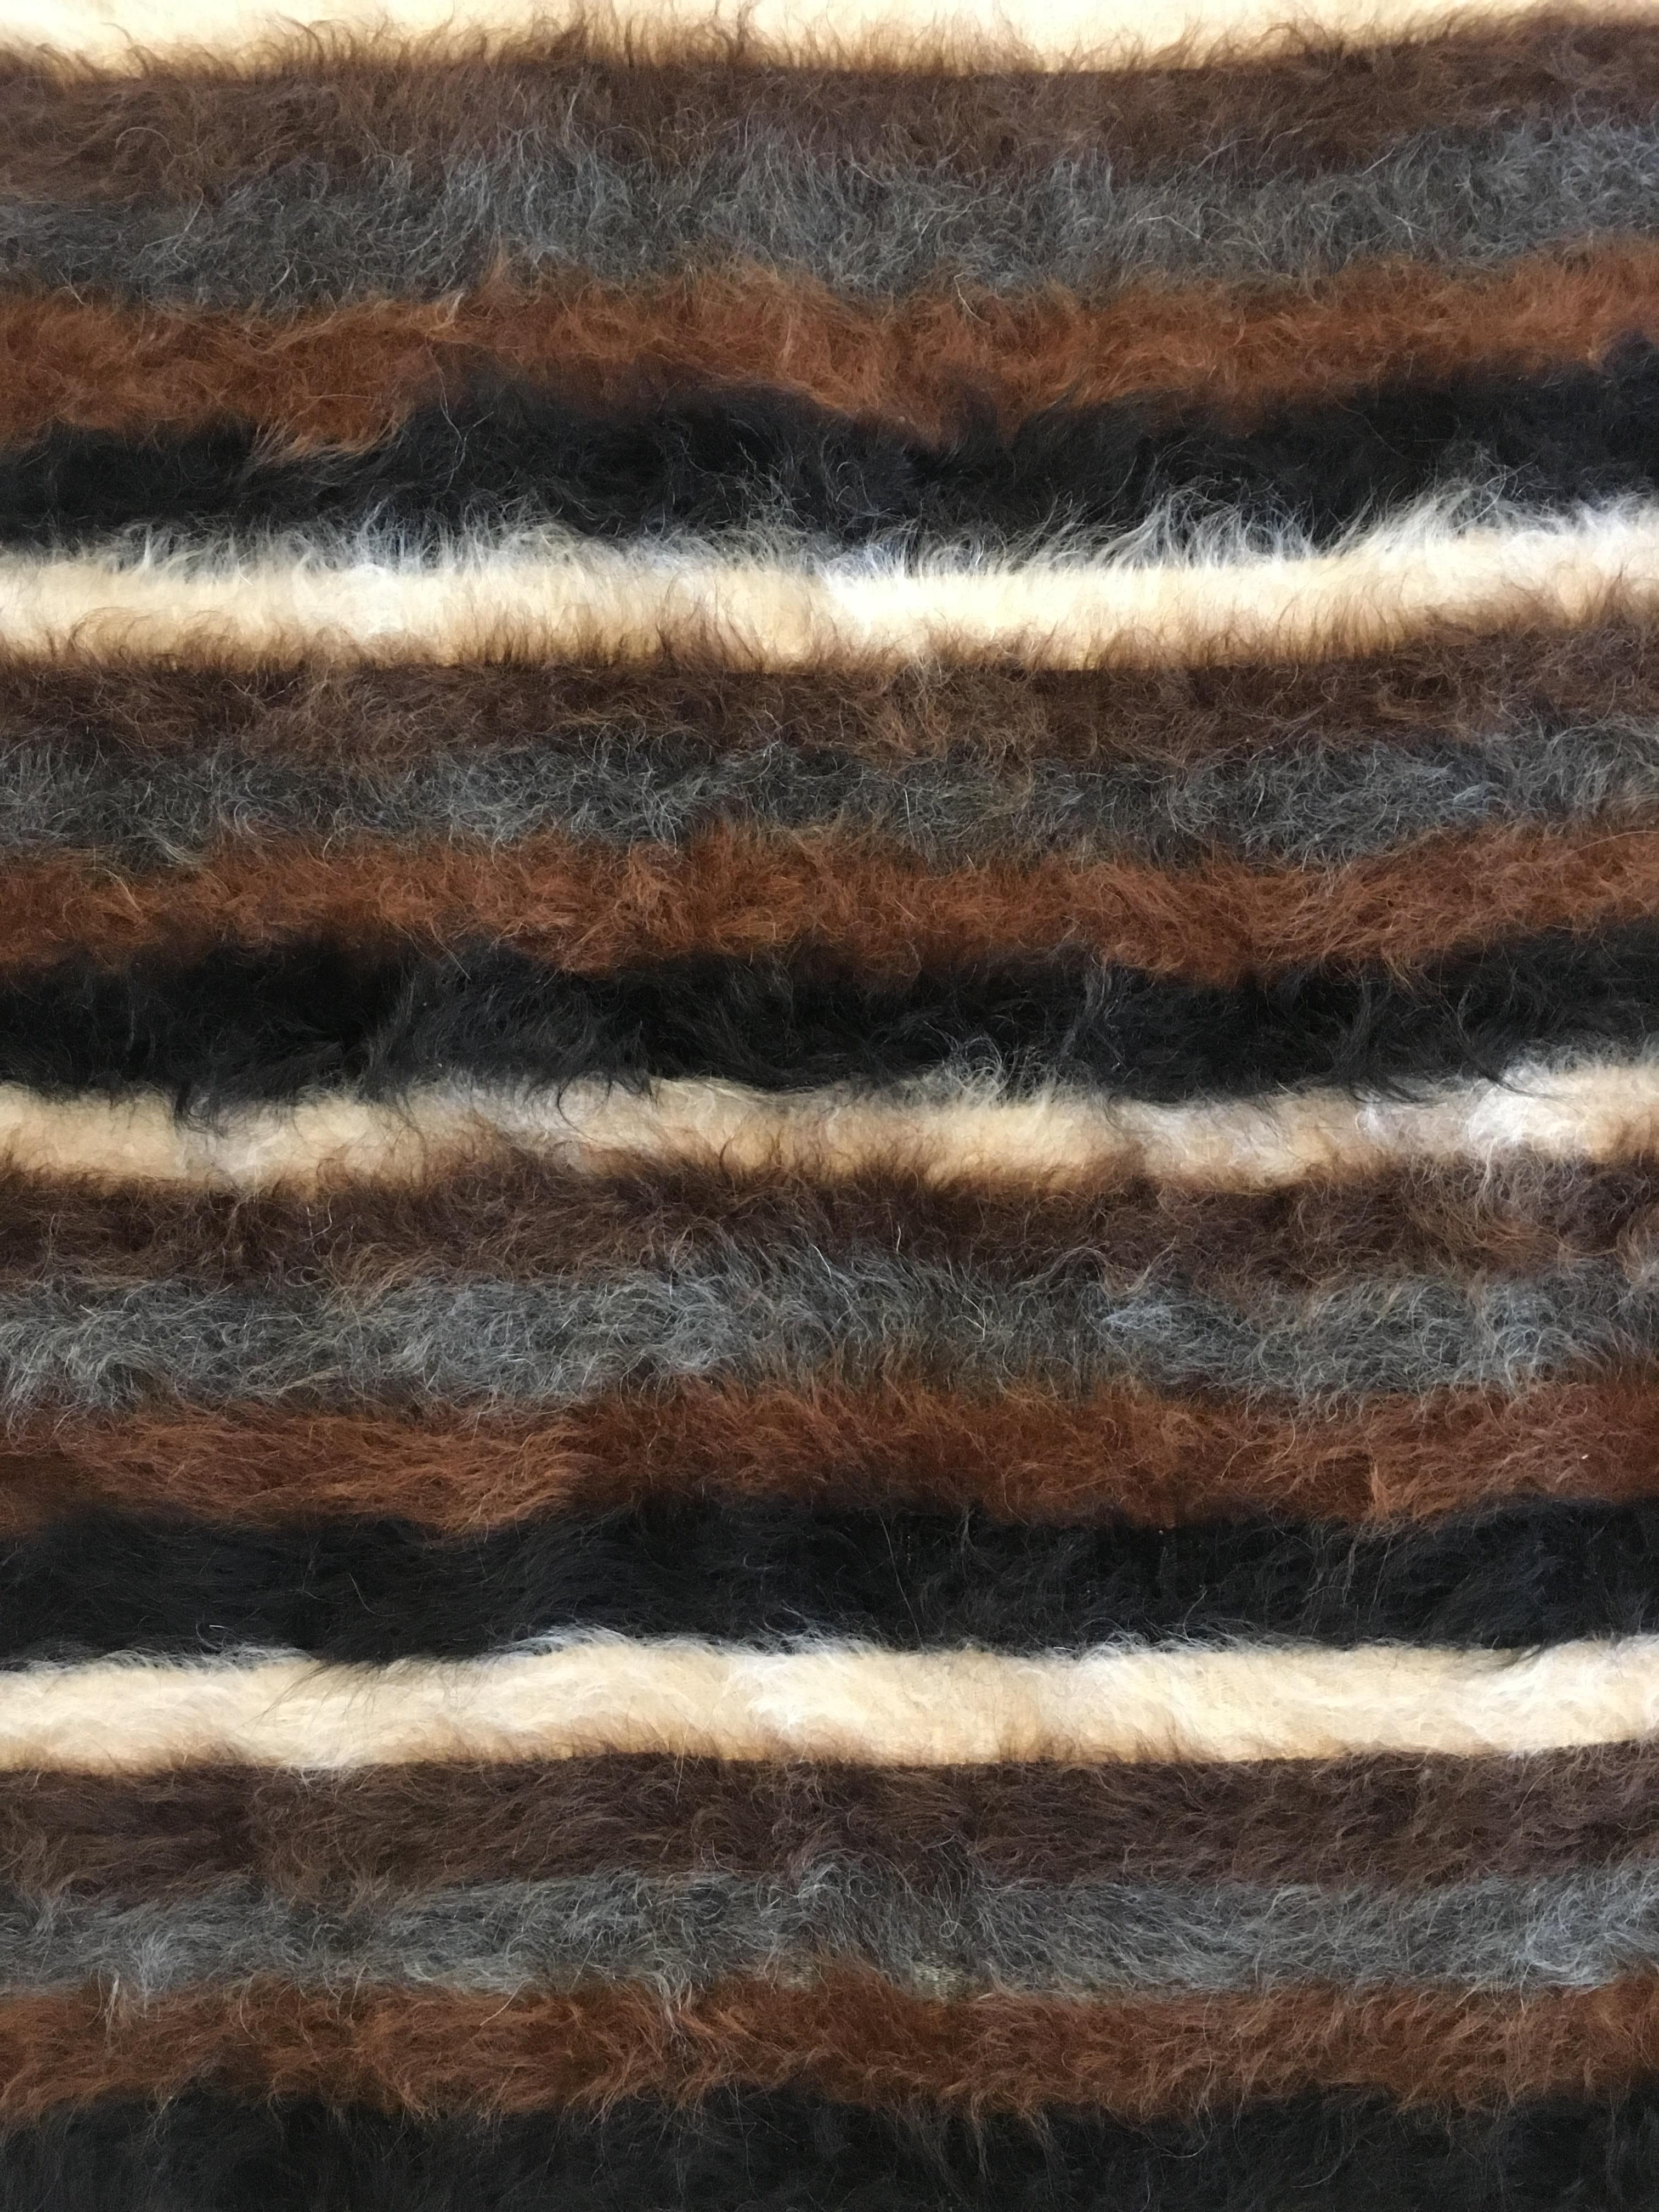 Handwoven in eastern Turkey, mid-20th century, this small rug has a cotton foundation and a woven soft goat hair pile using all natural, undyed colors of black brown and ivory. In excellent condition, with a truly great look.